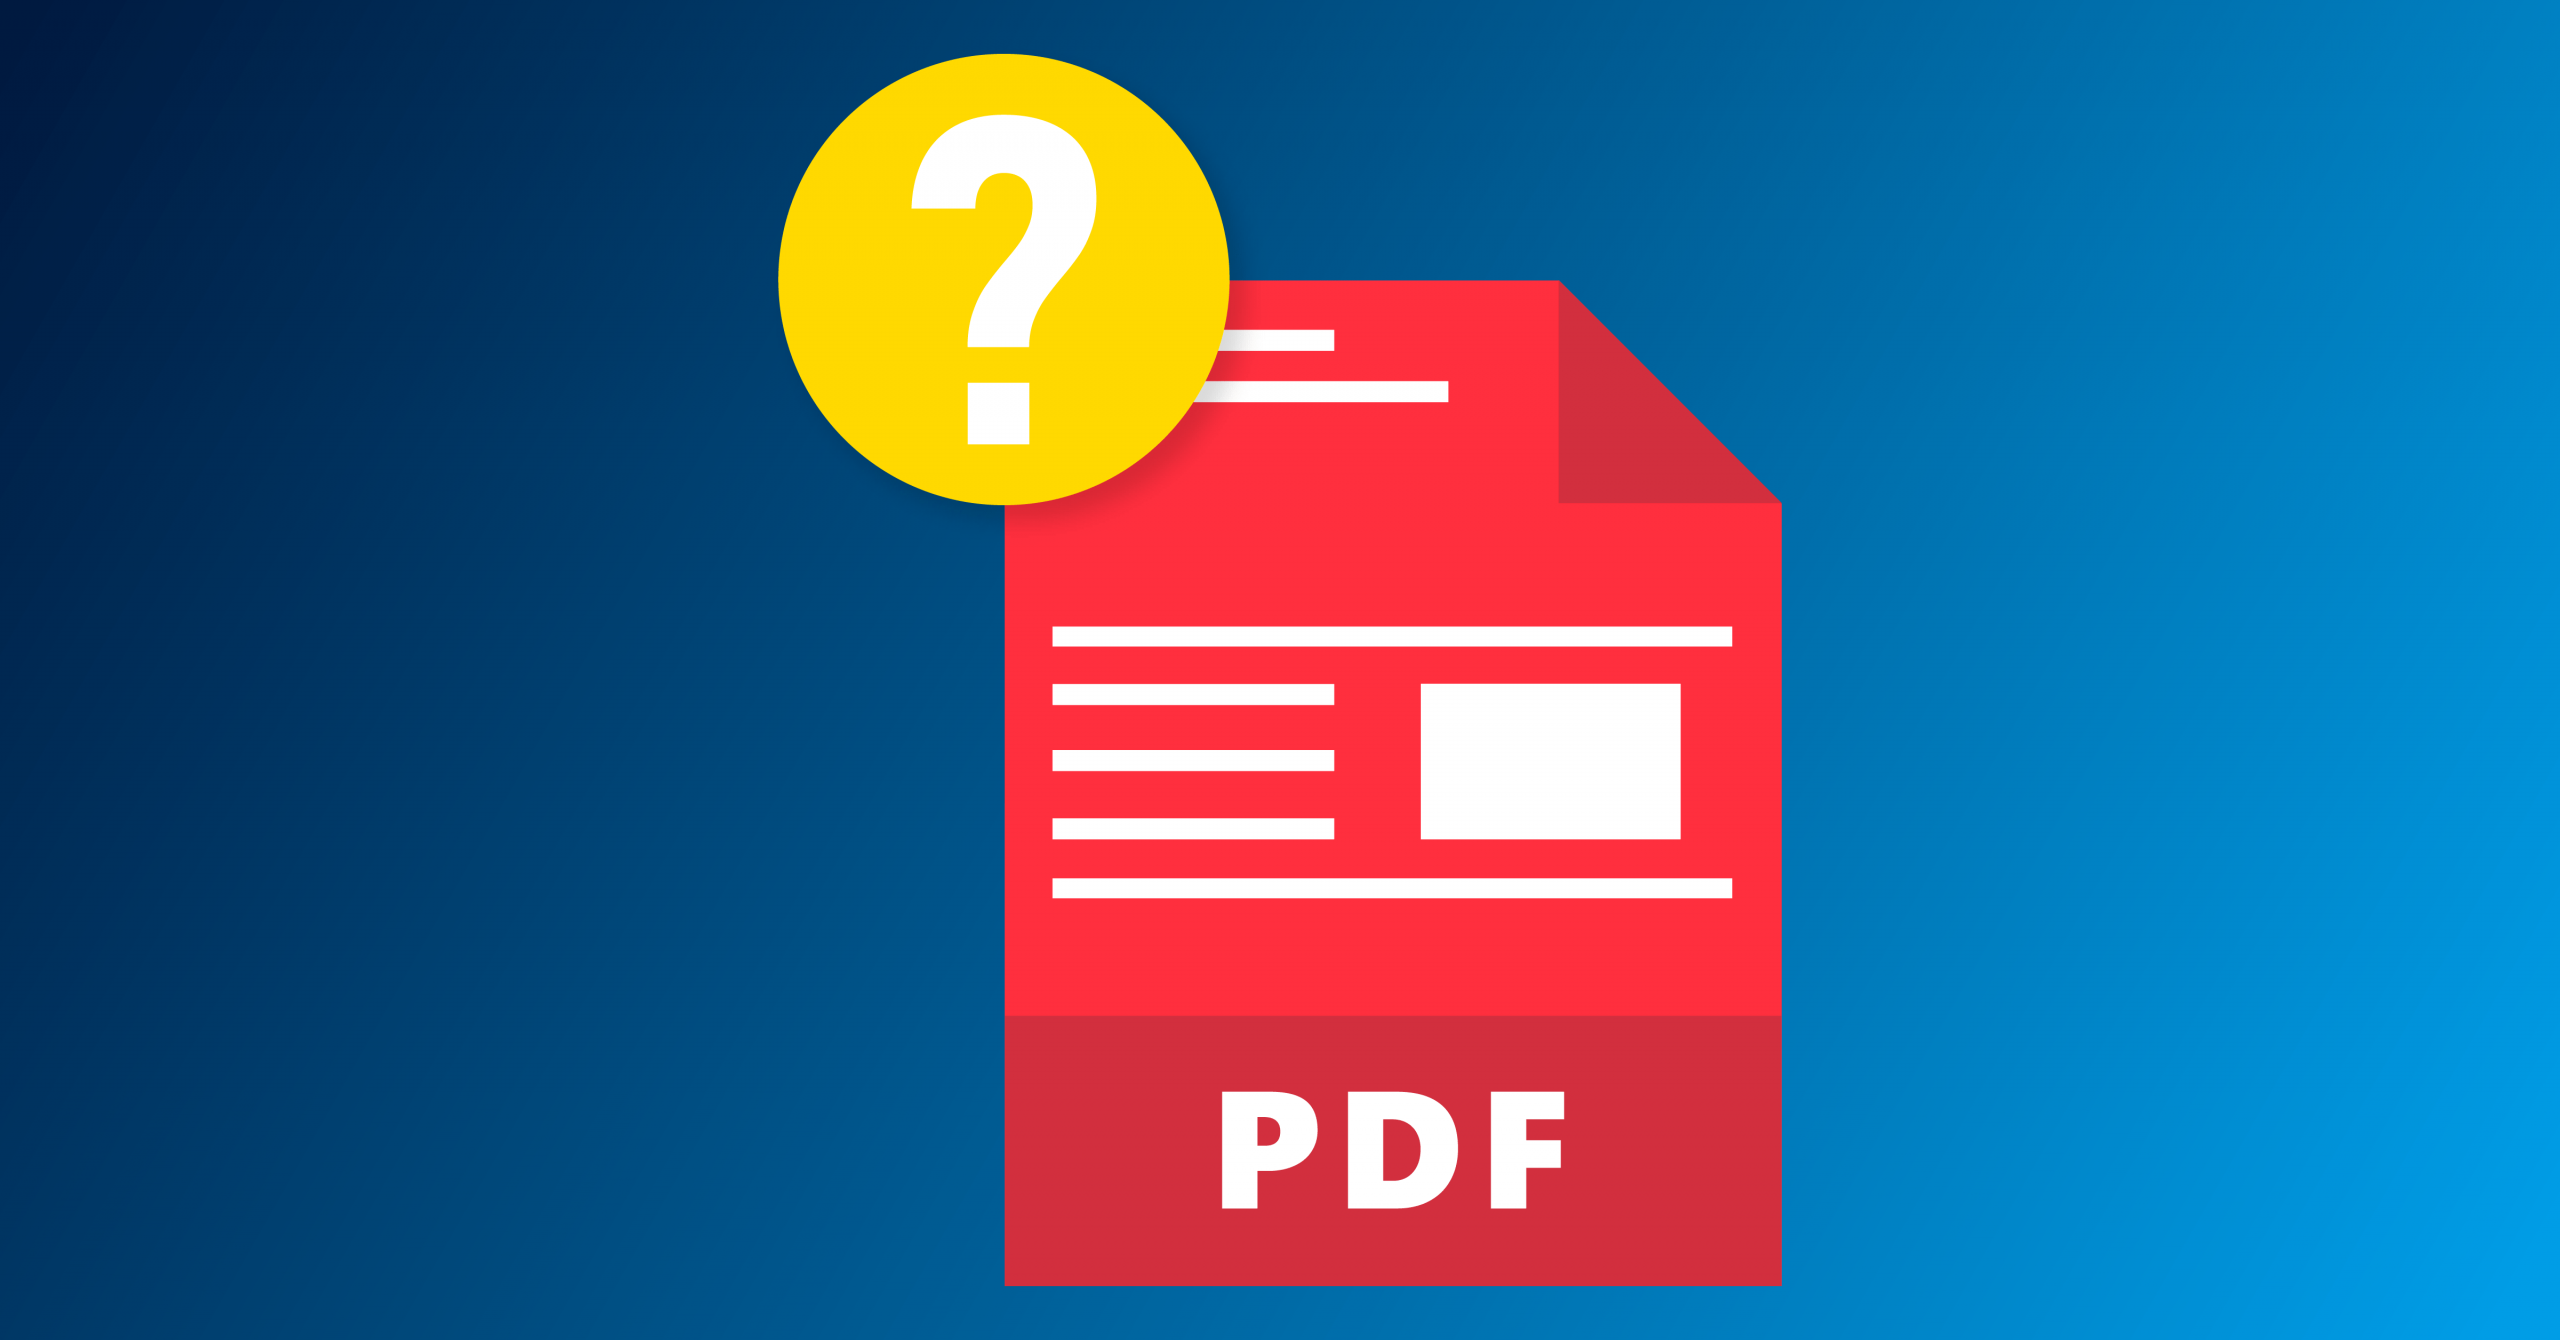 Dec-12-What-is-a-PDF-scaled